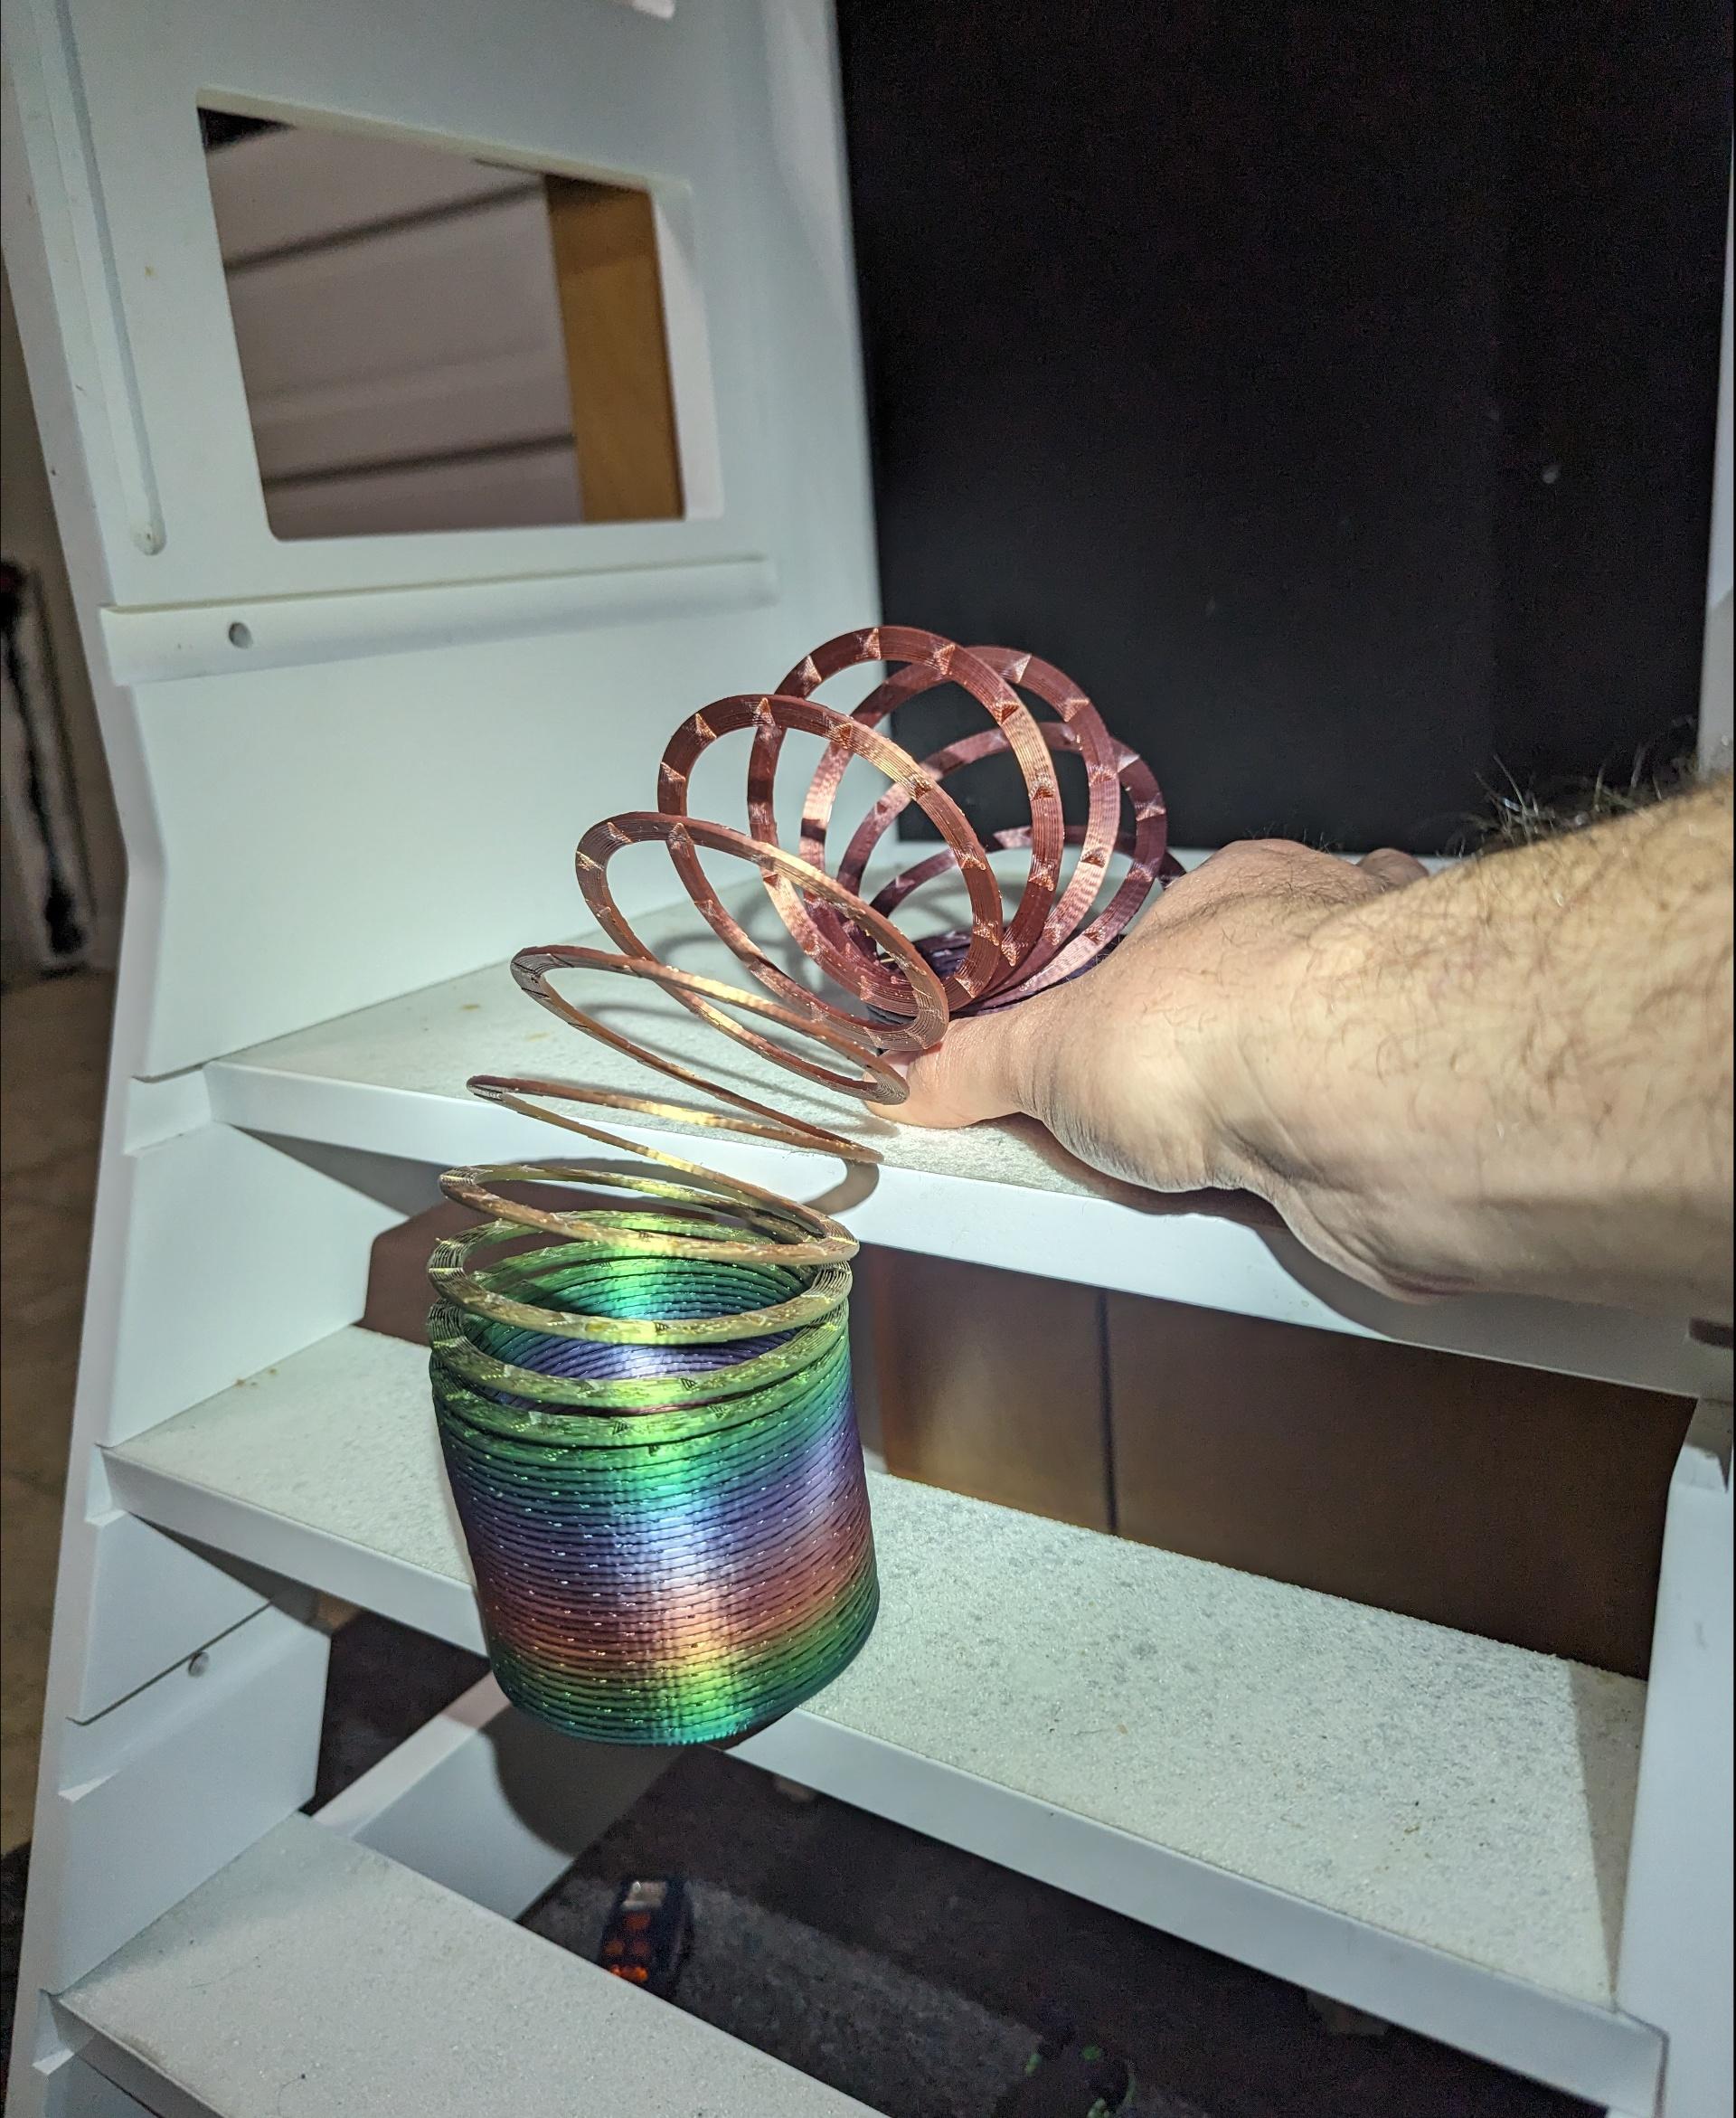 Classic Springo - Springo in Hatchbox Dark Rainbow PLA. Used CHEP hyperfast cura setting at 0.15 layer height, 5walls, which reduced the print time down to 6.5hrs.  - 3d model